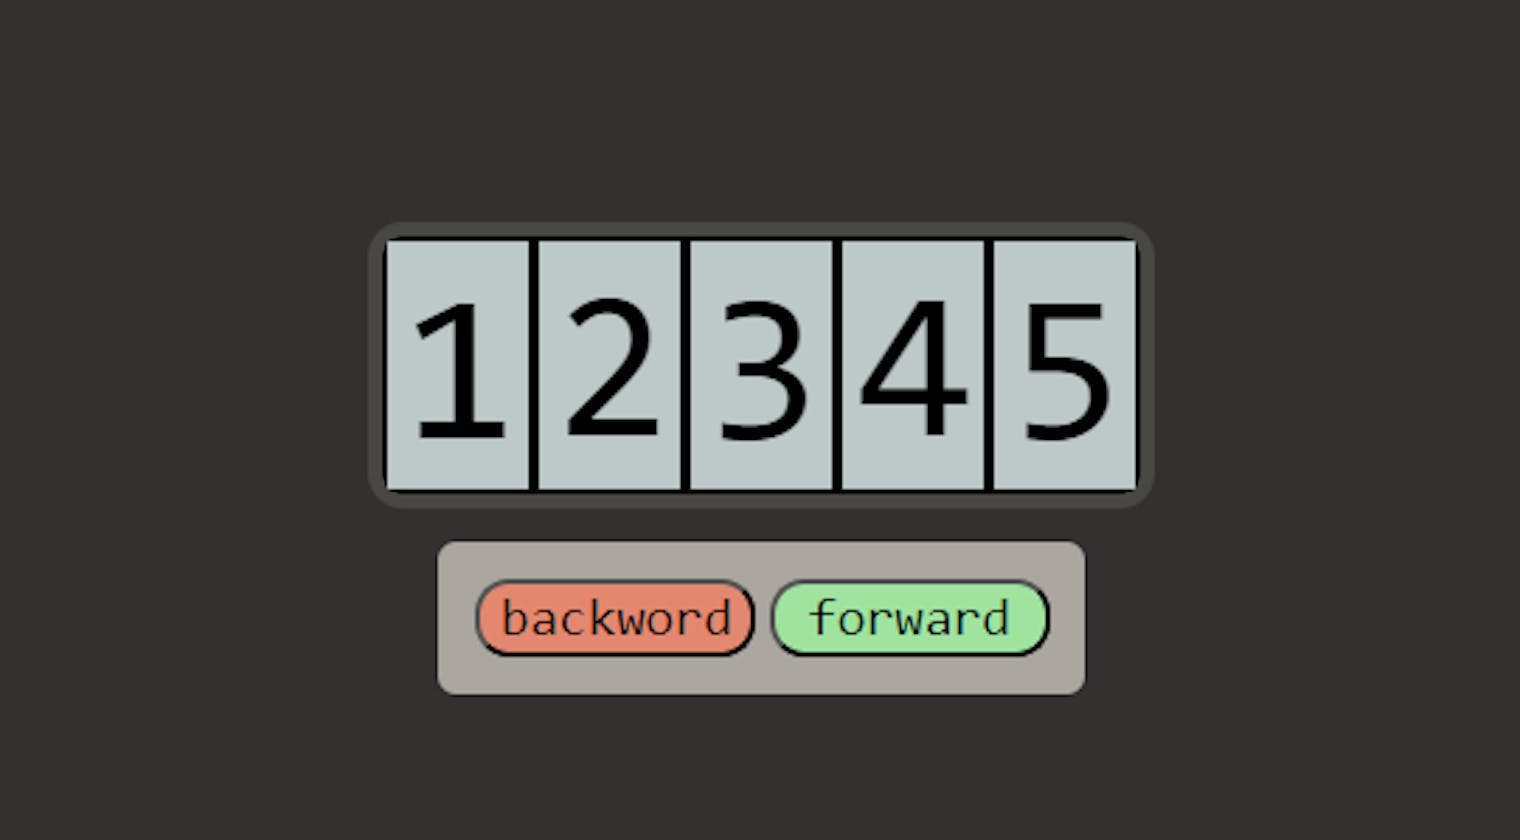 Cool looking counter in plain HTML,CSS and JS